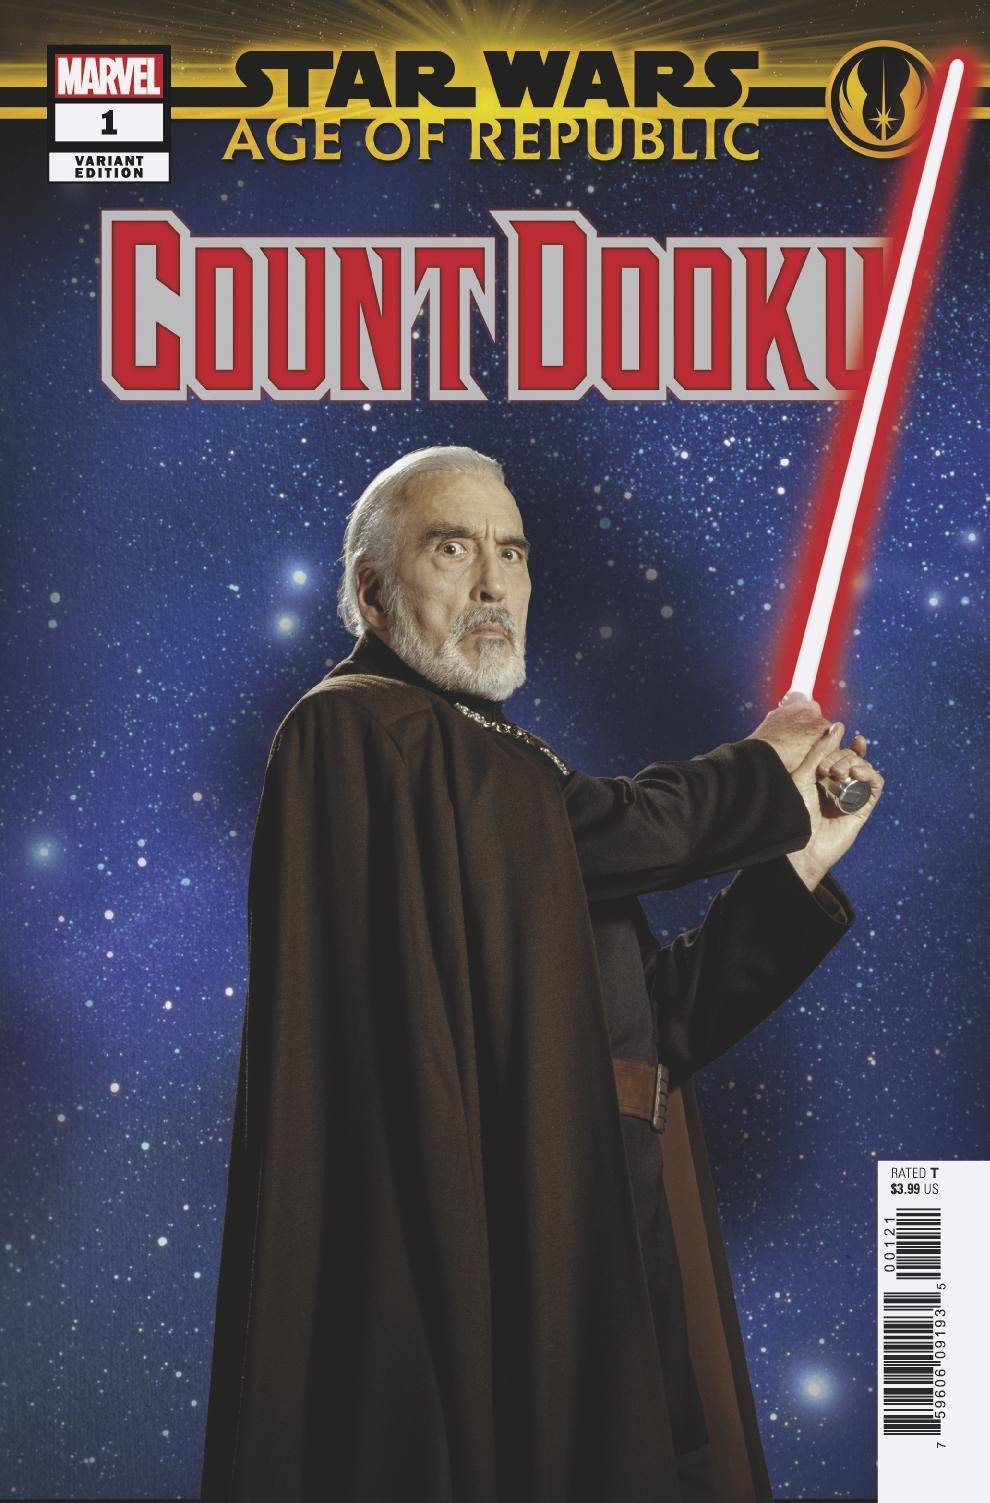 Star Wars: Age of Republic - Count Dooku #1 (One-Shot)  Movie Photo Variant